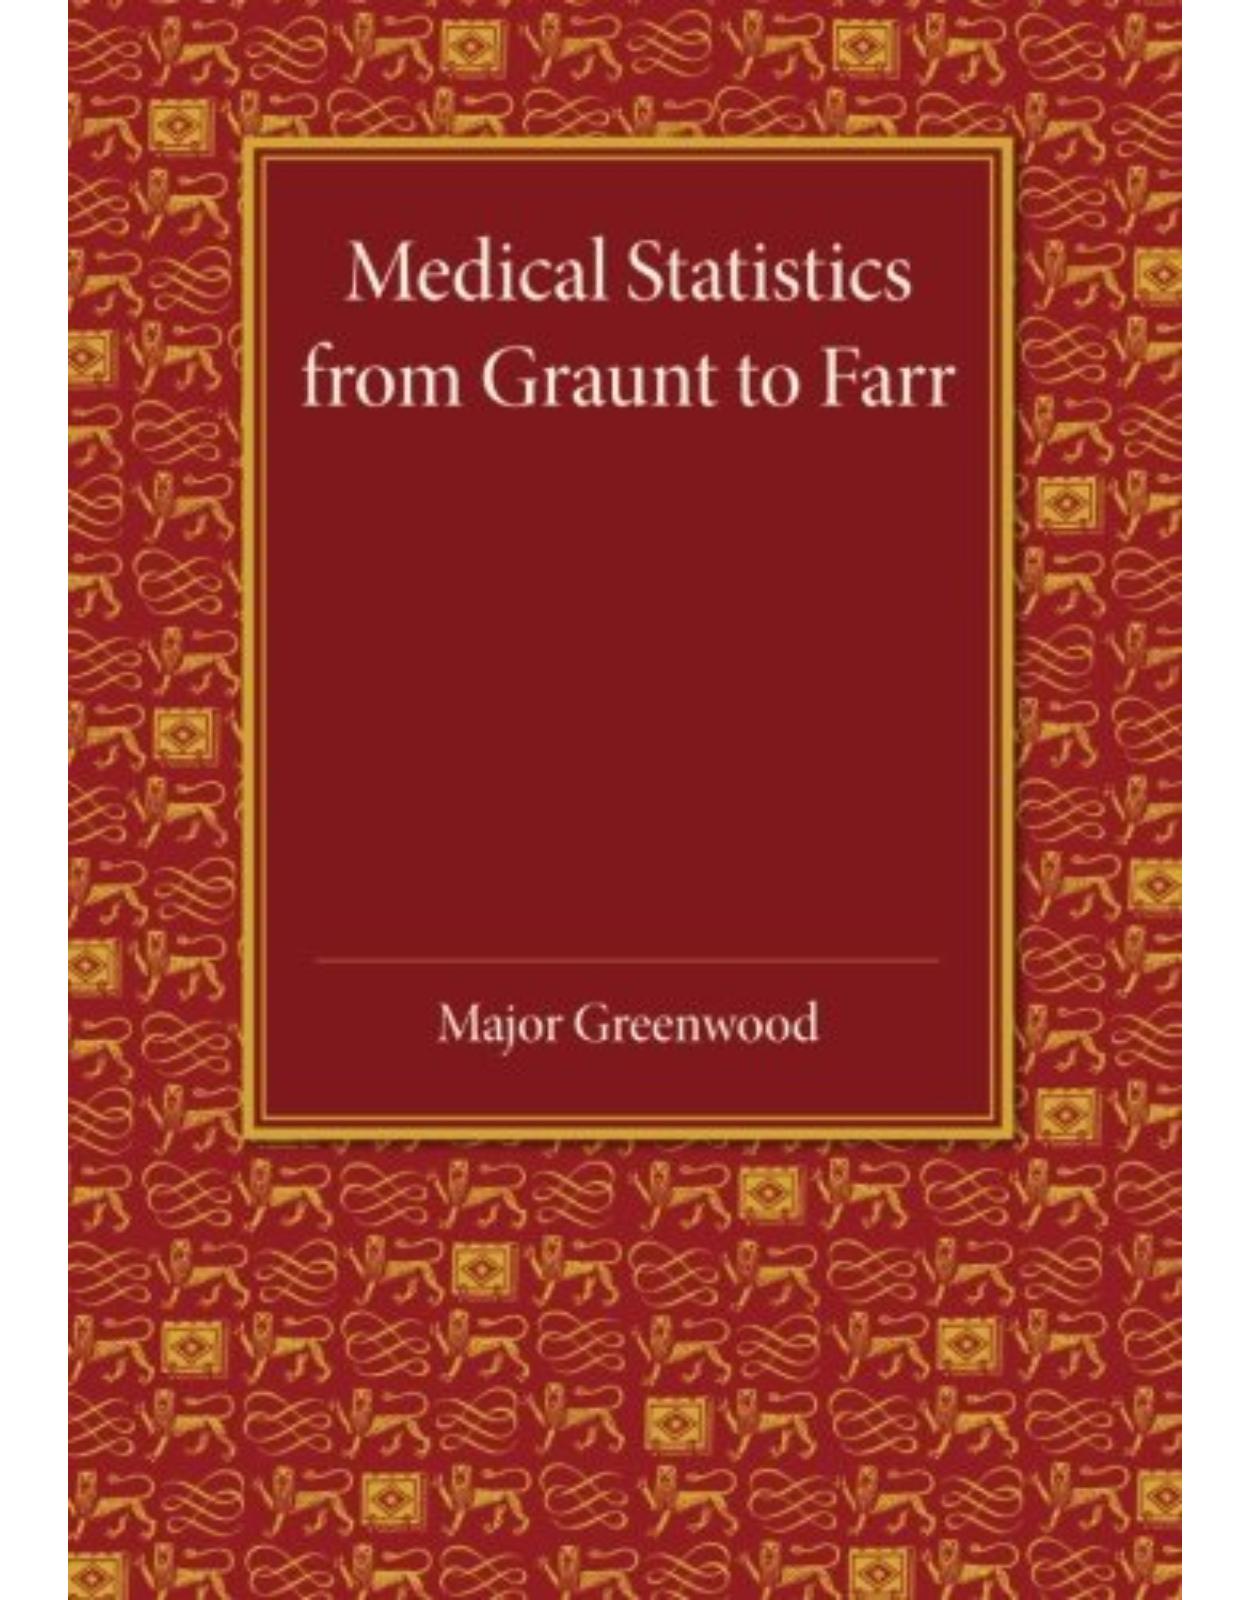 Medical Statistics from Graunt to Farr: The Fitzpatrick Lectures for the Years 1941 and 1943, Delivered at the Royal College of Physicians of London in February 1943